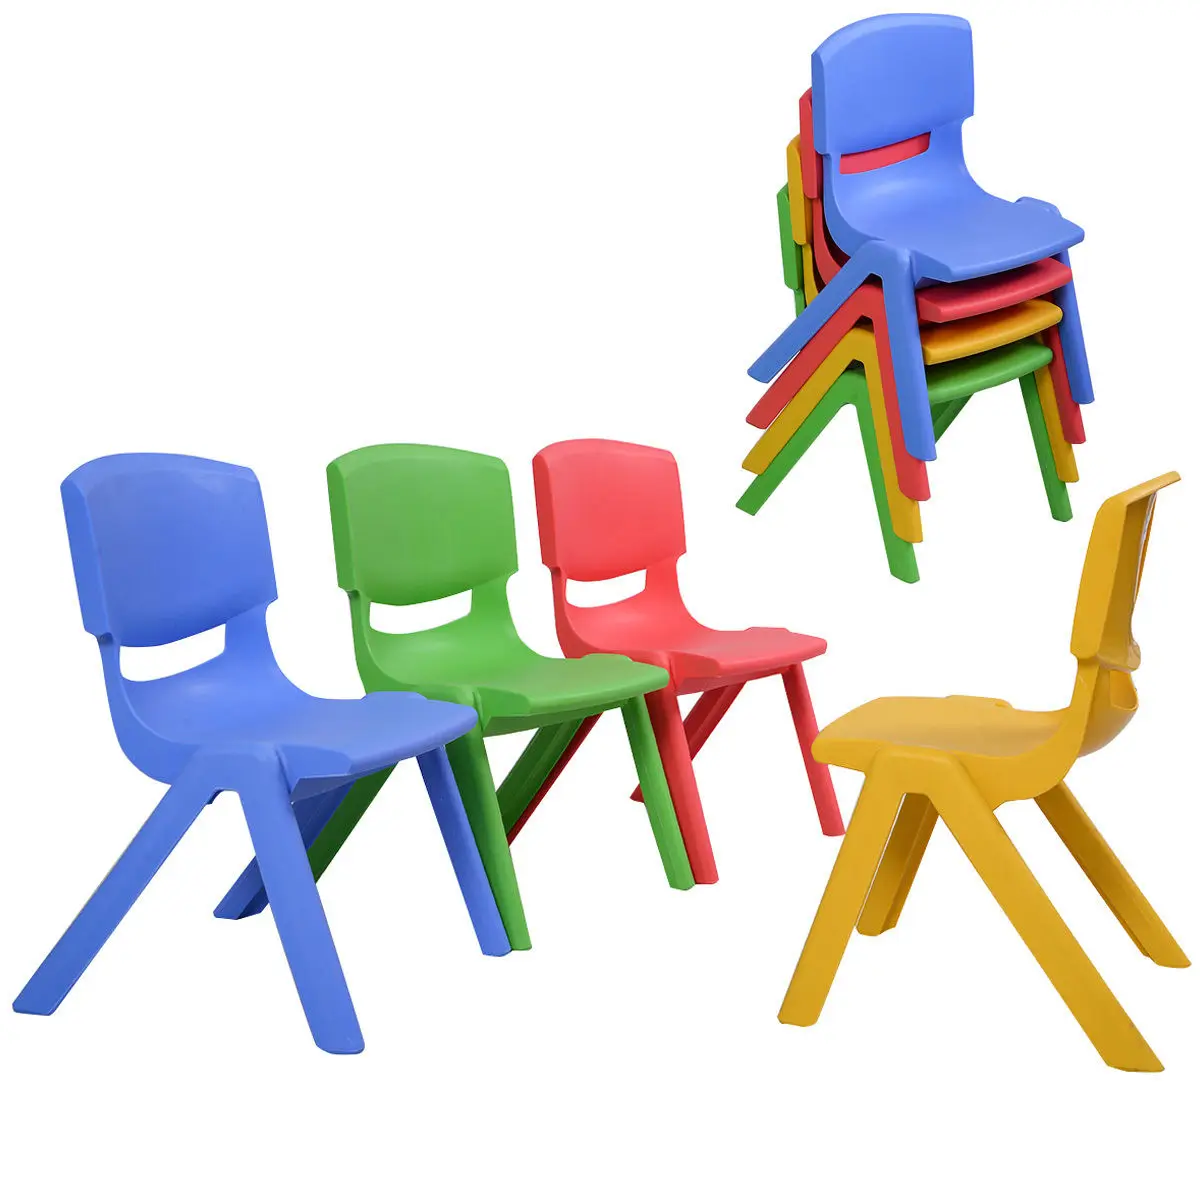 Set of 8 Kids Plastic Chairs Stackable Play and Learn Furniture Colorful New